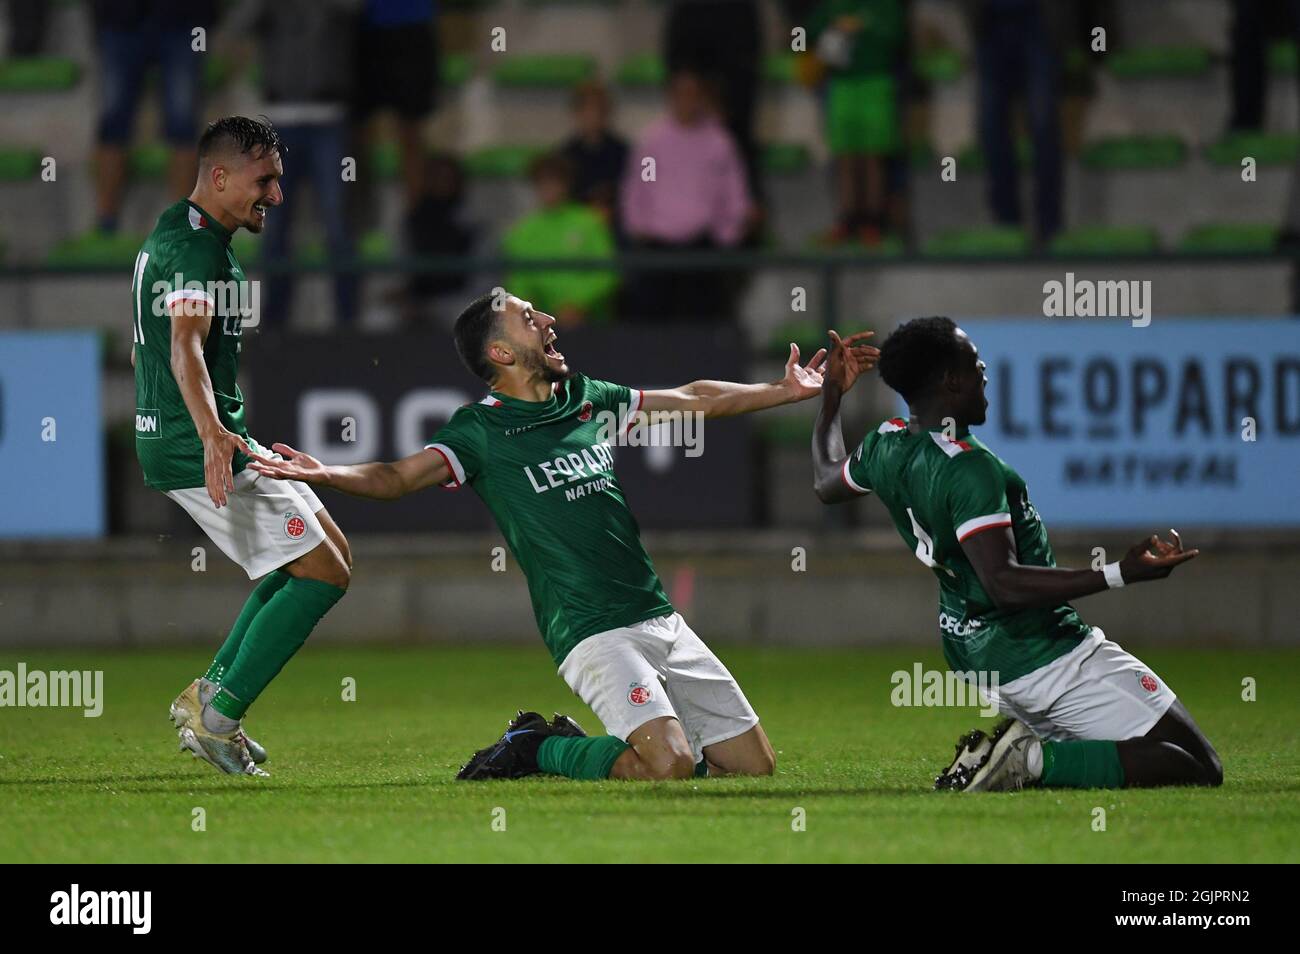 Virton's Ayyoub Allach celebrates after scoring during a soccer match between Royal Excelsior Virton and Lommel SK, Saturday 11 September 2021 in Virt Stock Photo